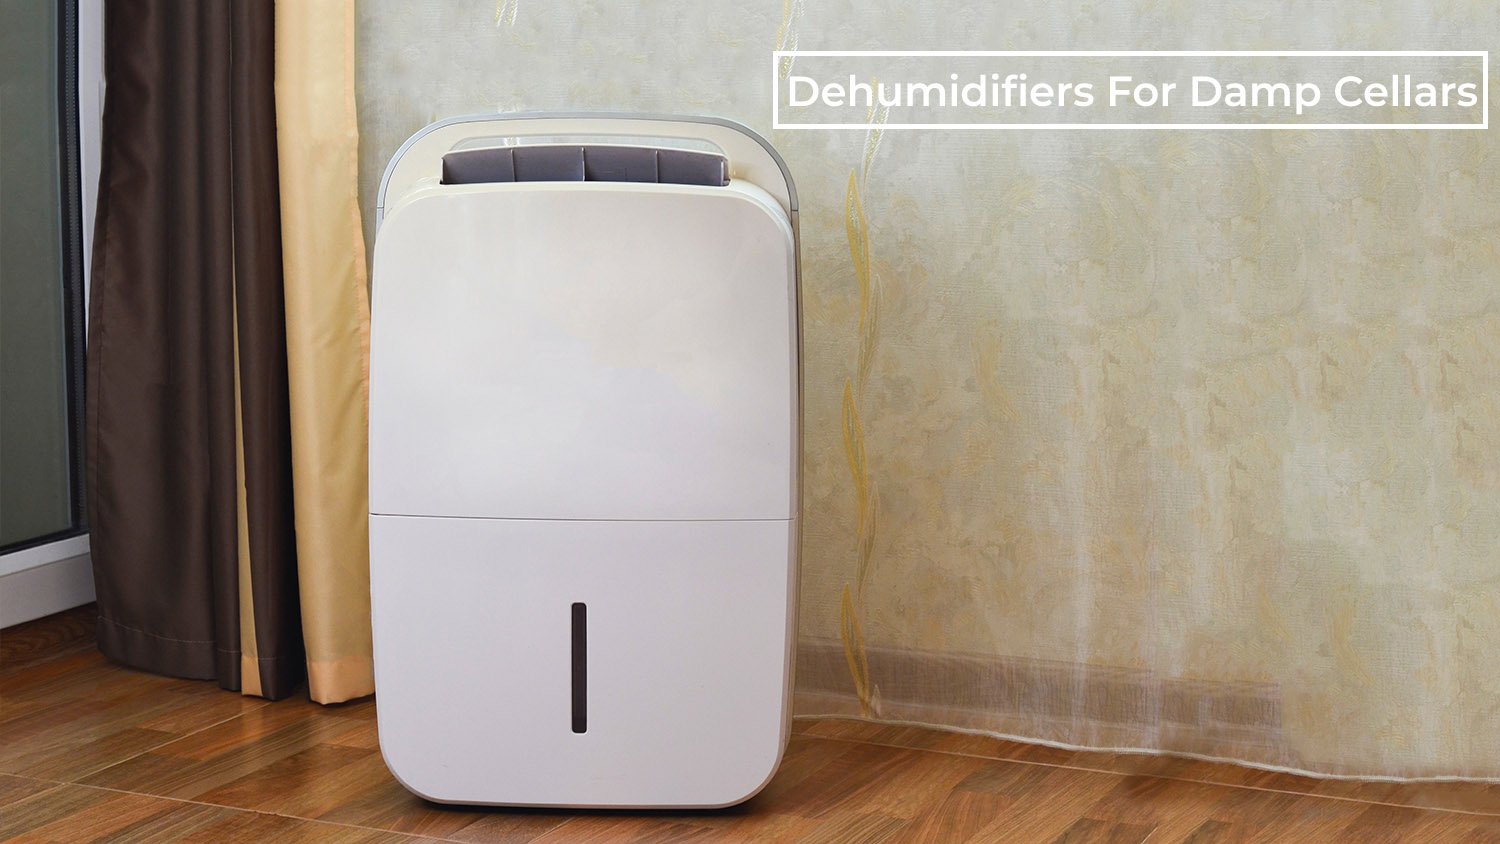 Dehumidifiers For Damp Cellars: How to Protect Your Health and Valuables